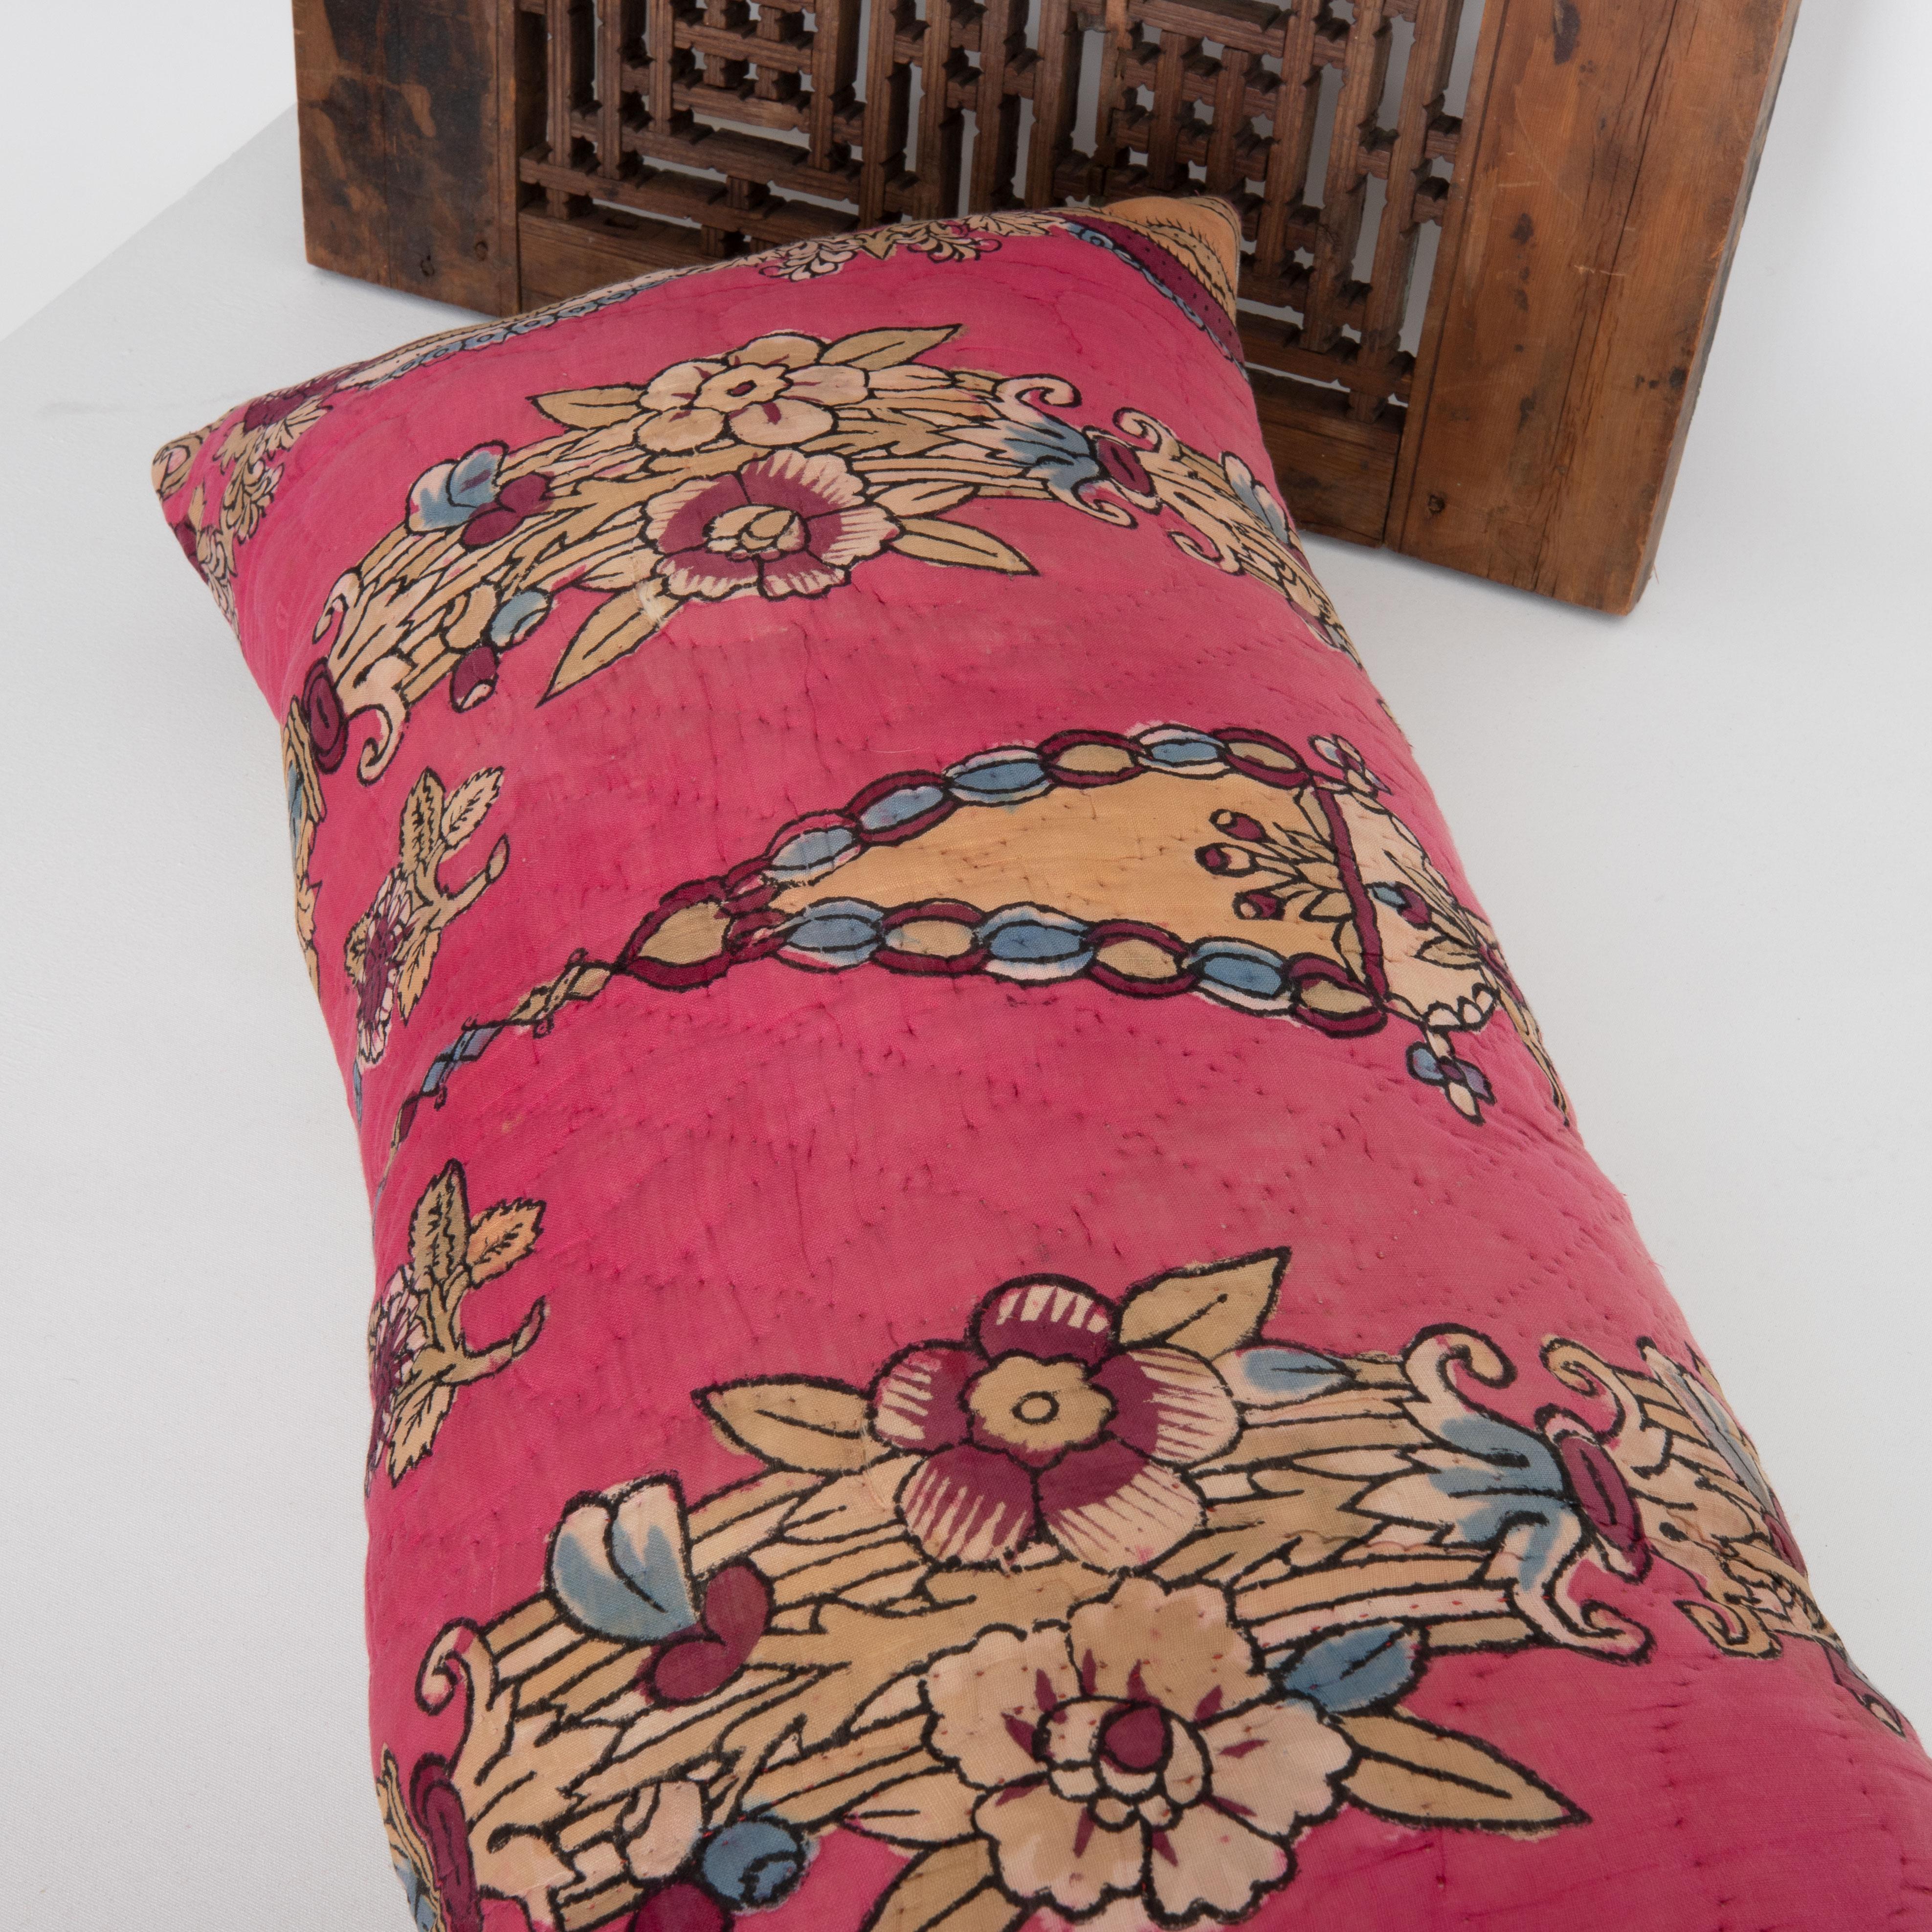 Pillow Case Made From Mid 20th C. Anatolian Quilt In Good Condition For Sale In Istanbul, TR